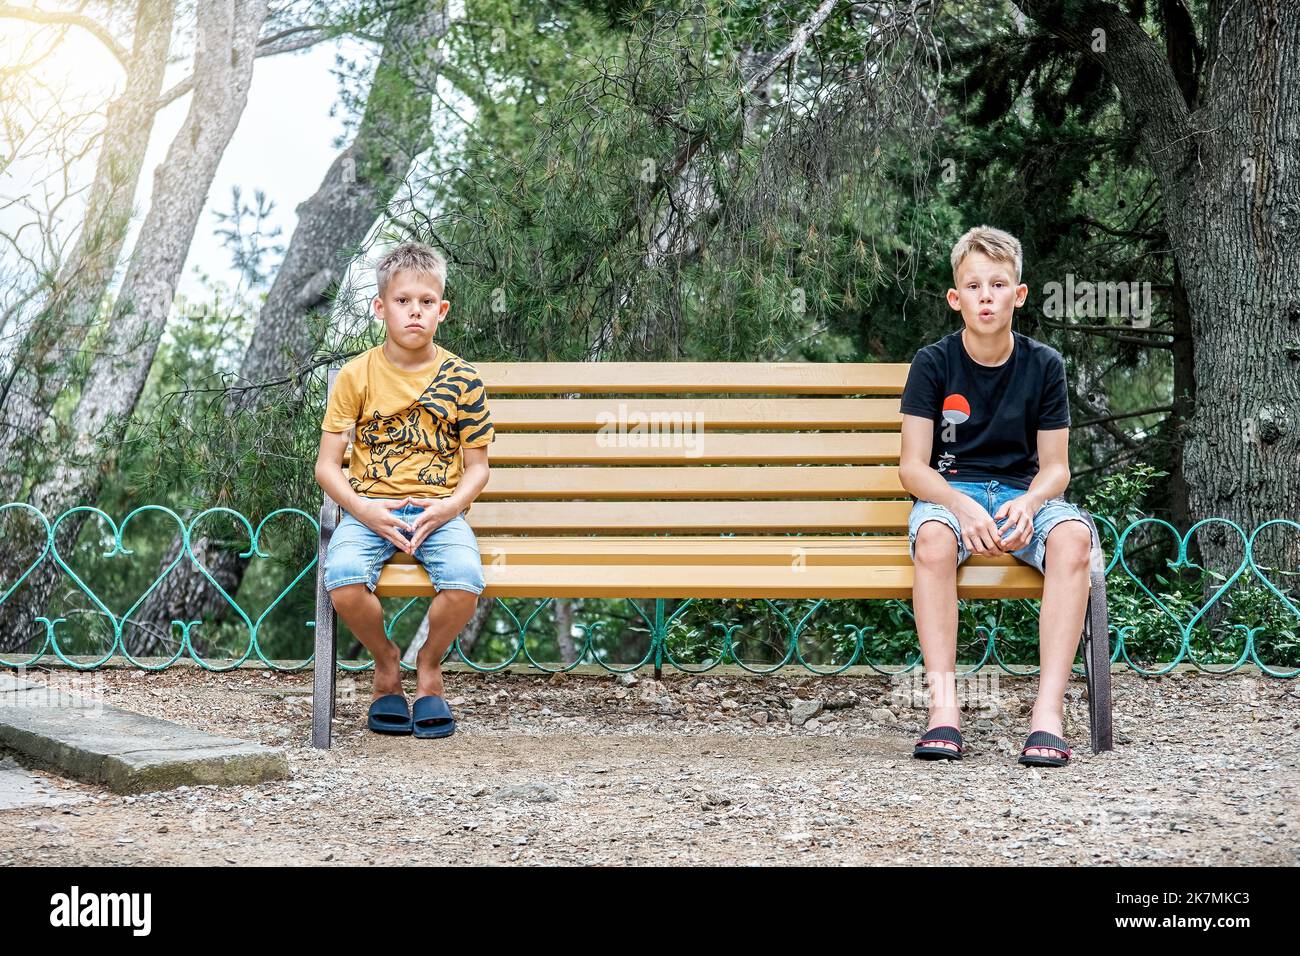 Siblings sitting on wooden bench look with upset and disappointed expressions. Brothers sit on different sides of bench in silence after argument Stock Photo